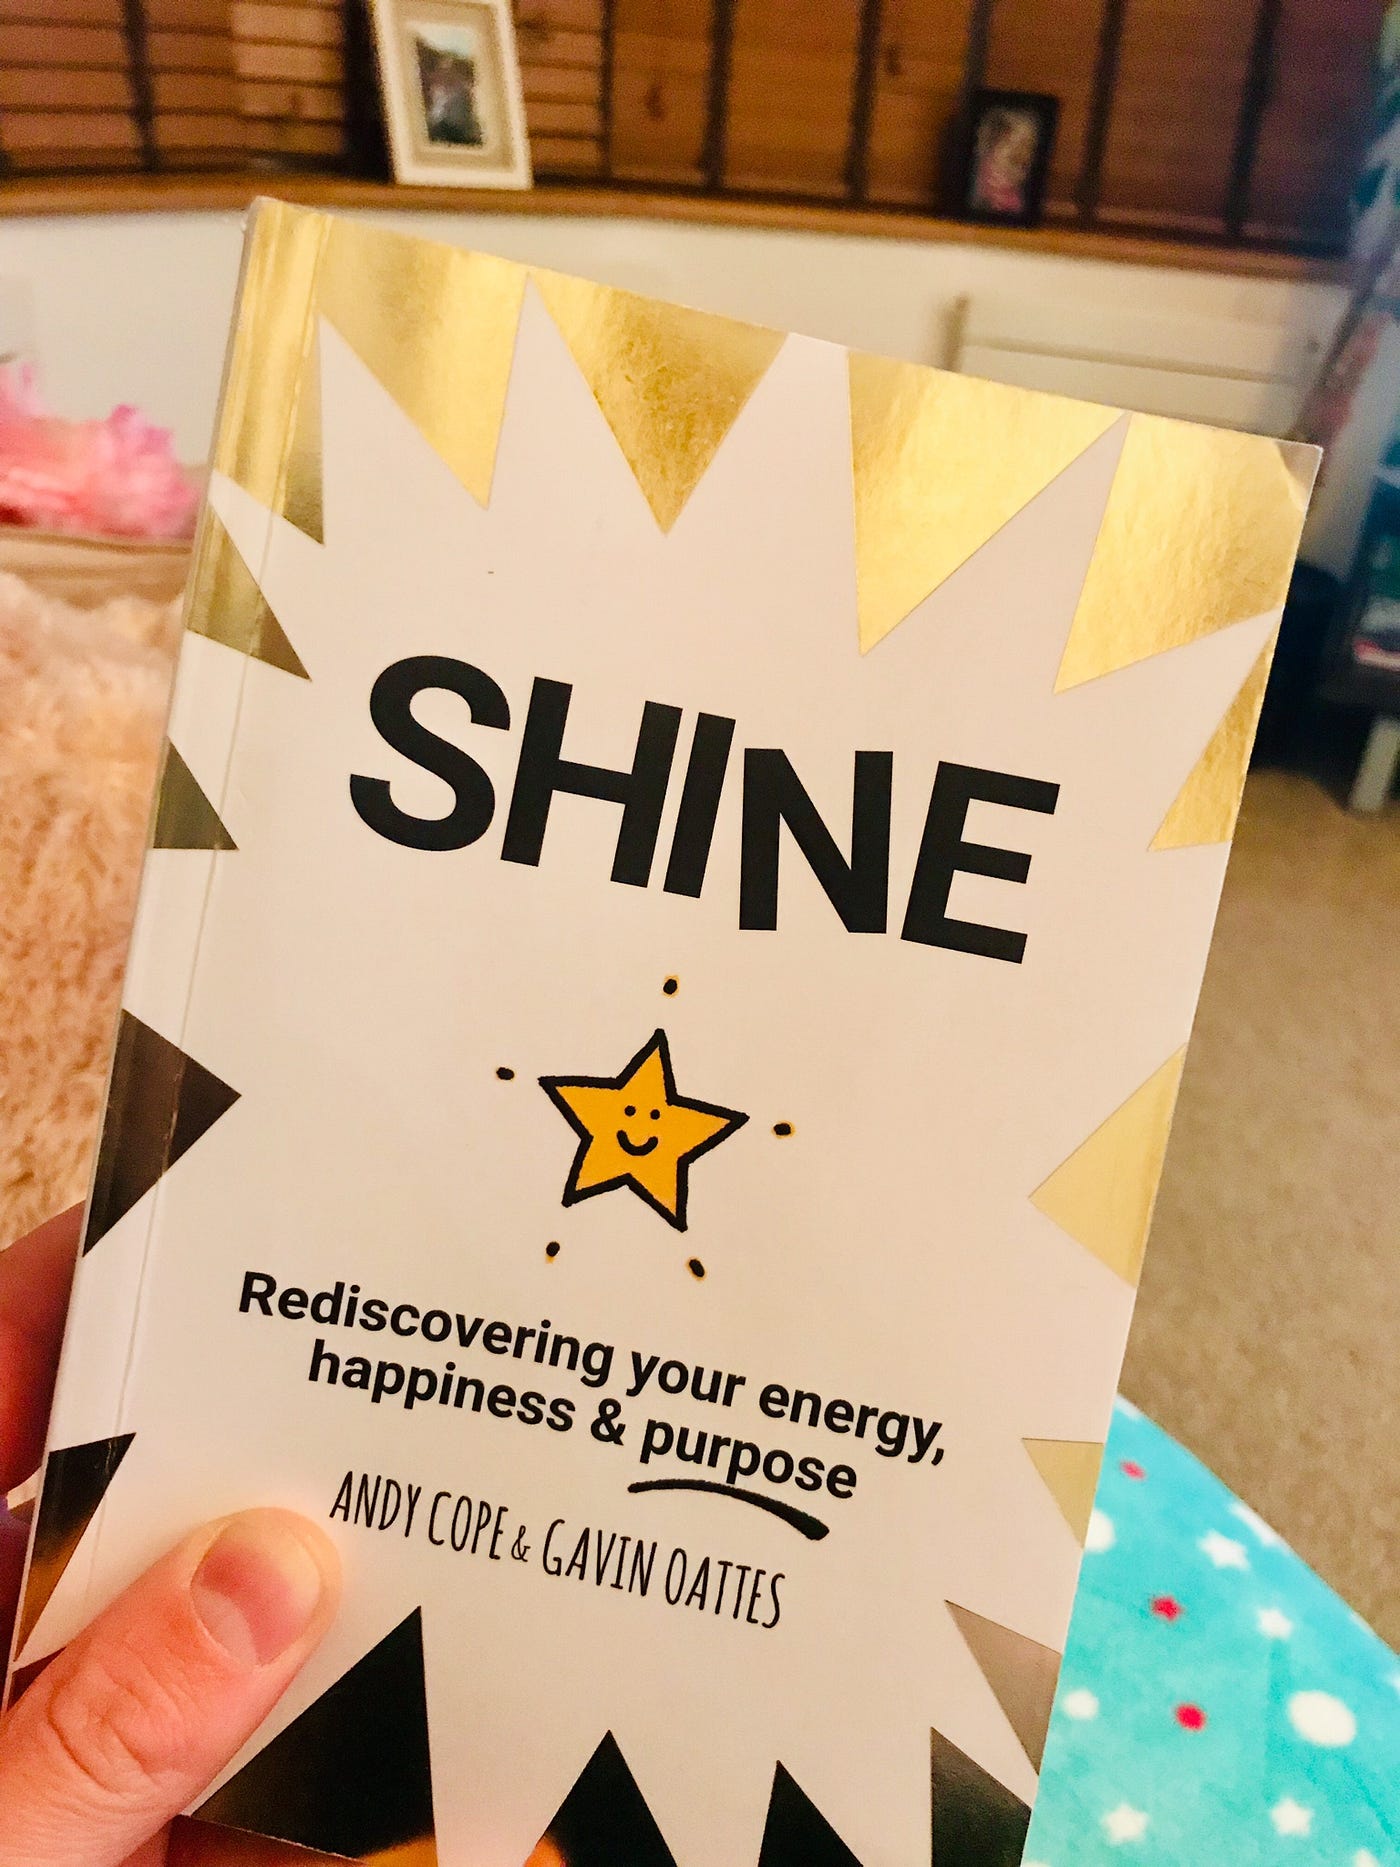 Shine - Rediscovering your energy, happiness & purpose